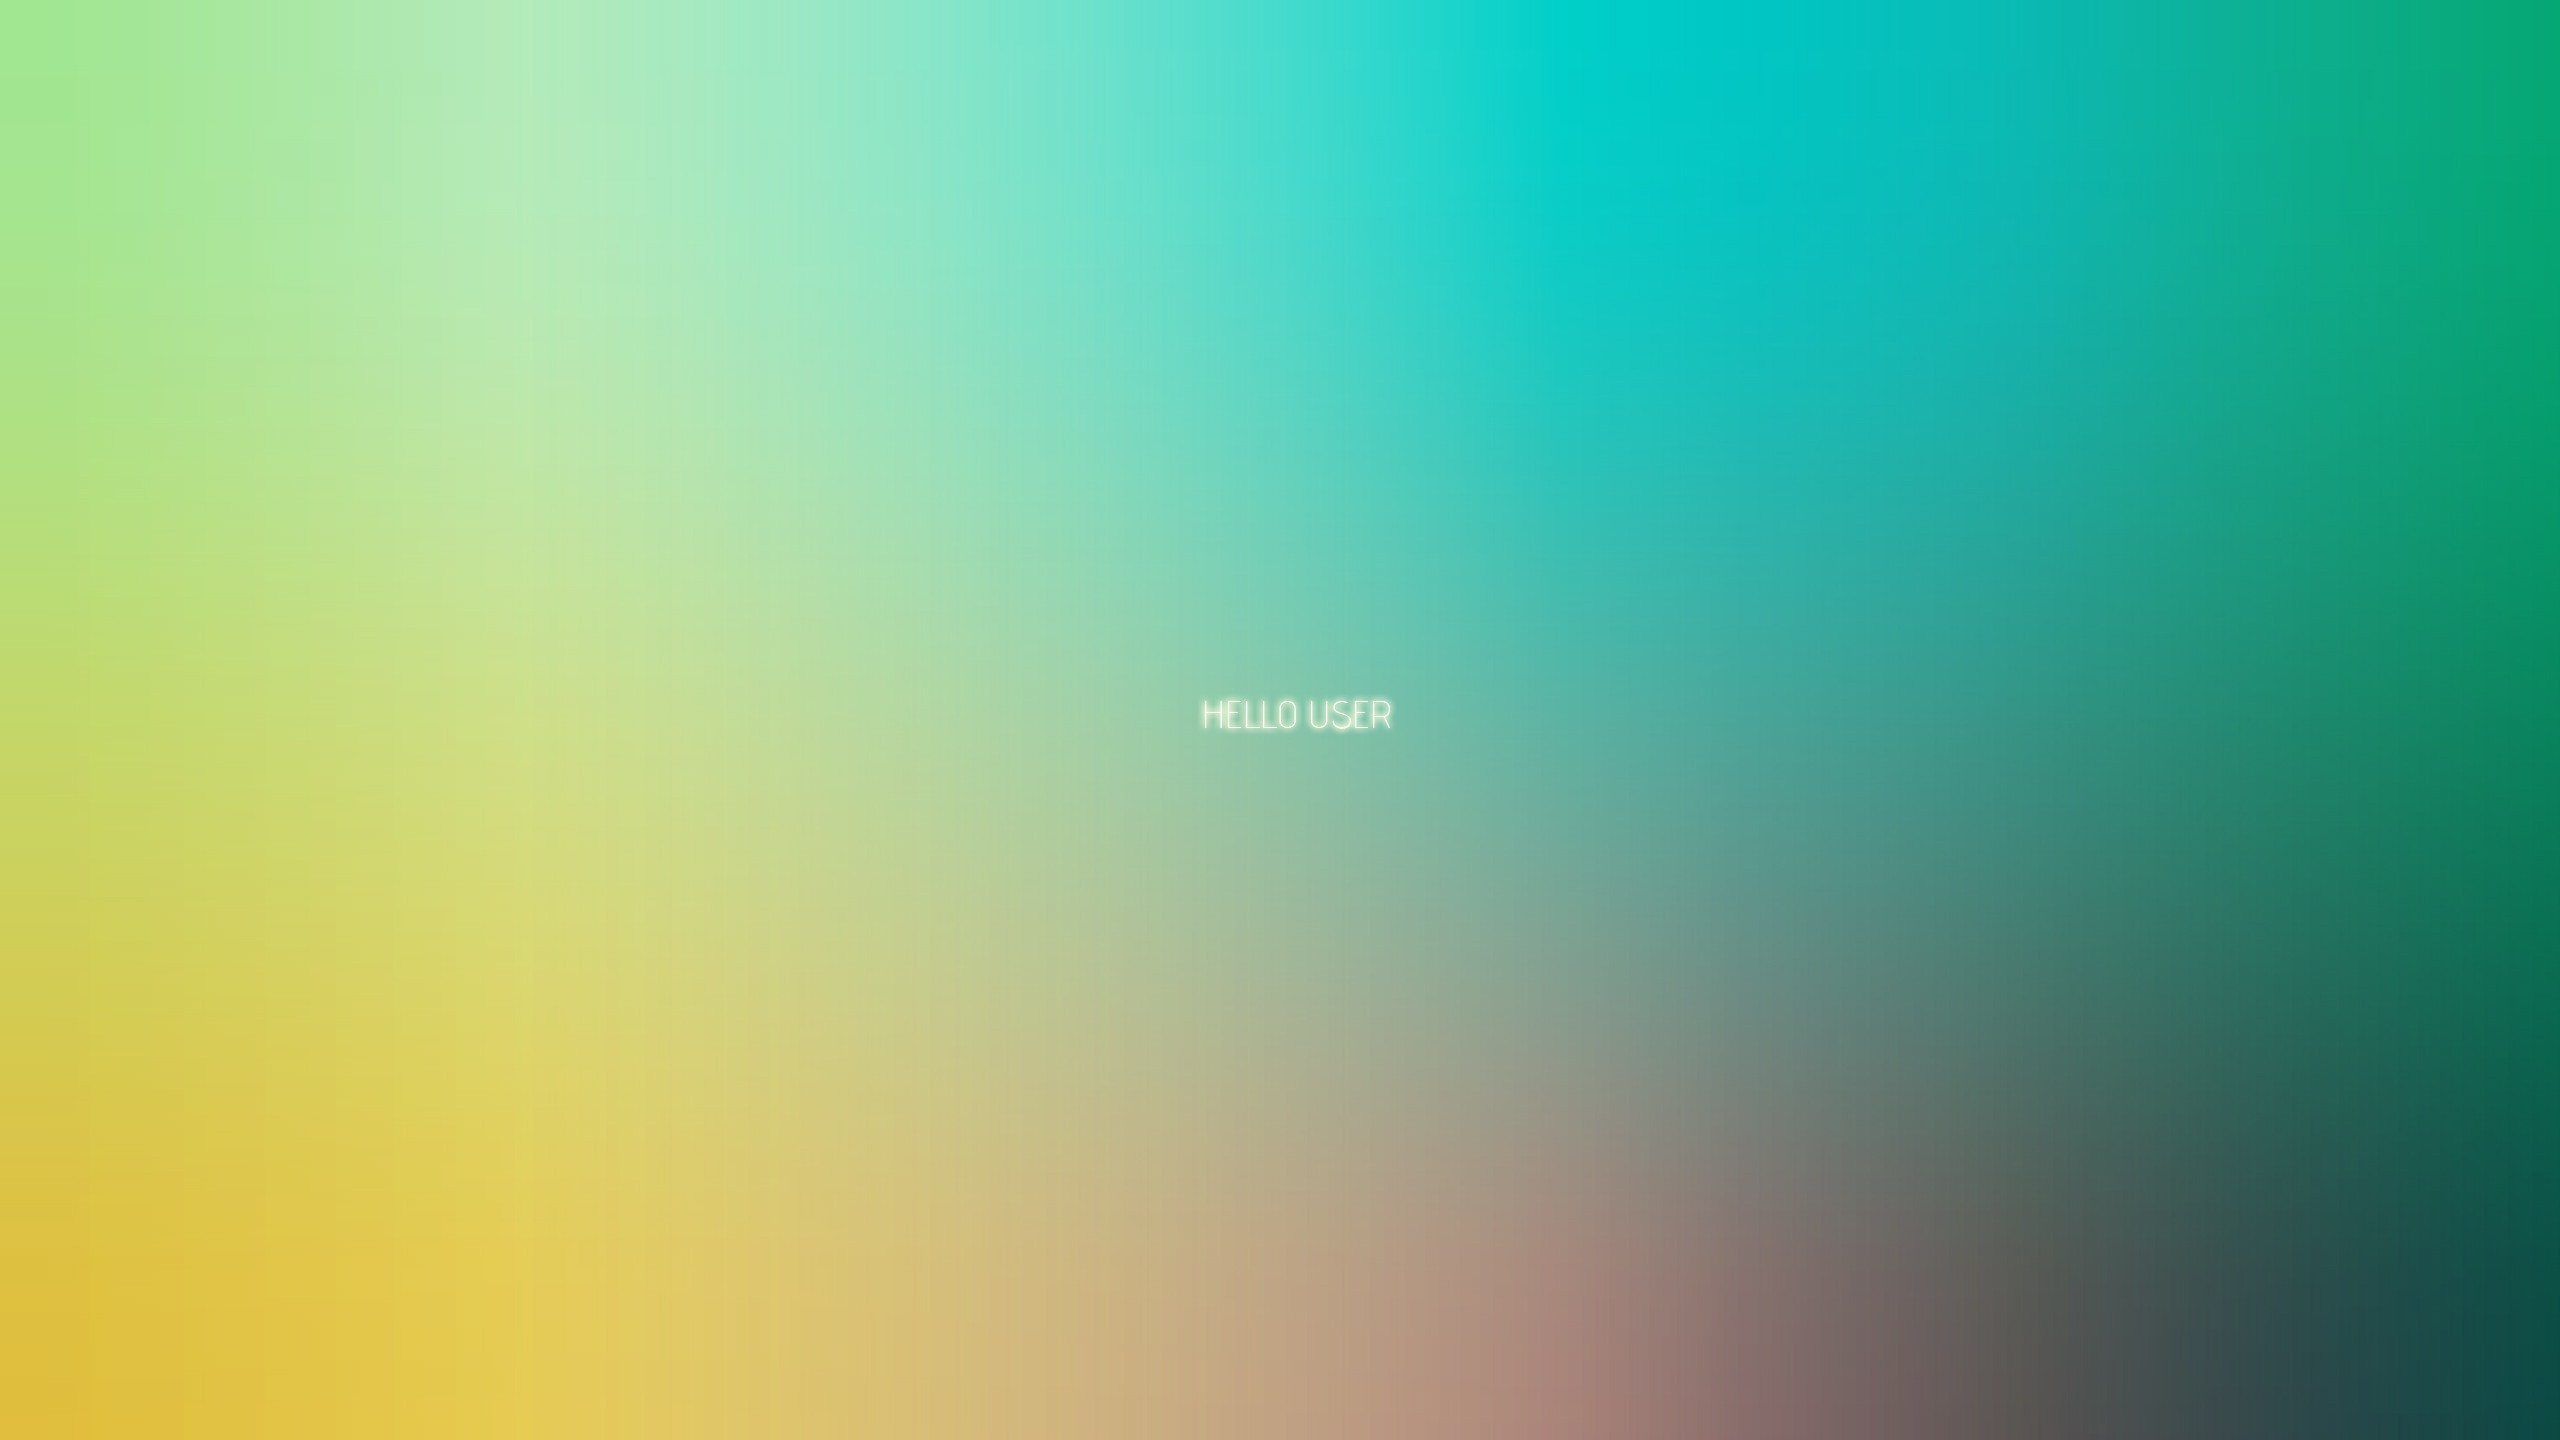 2560x1440 javascript - Multi-Dimensional Gradient - Stack Overflow Search photos  "gradient background" ...